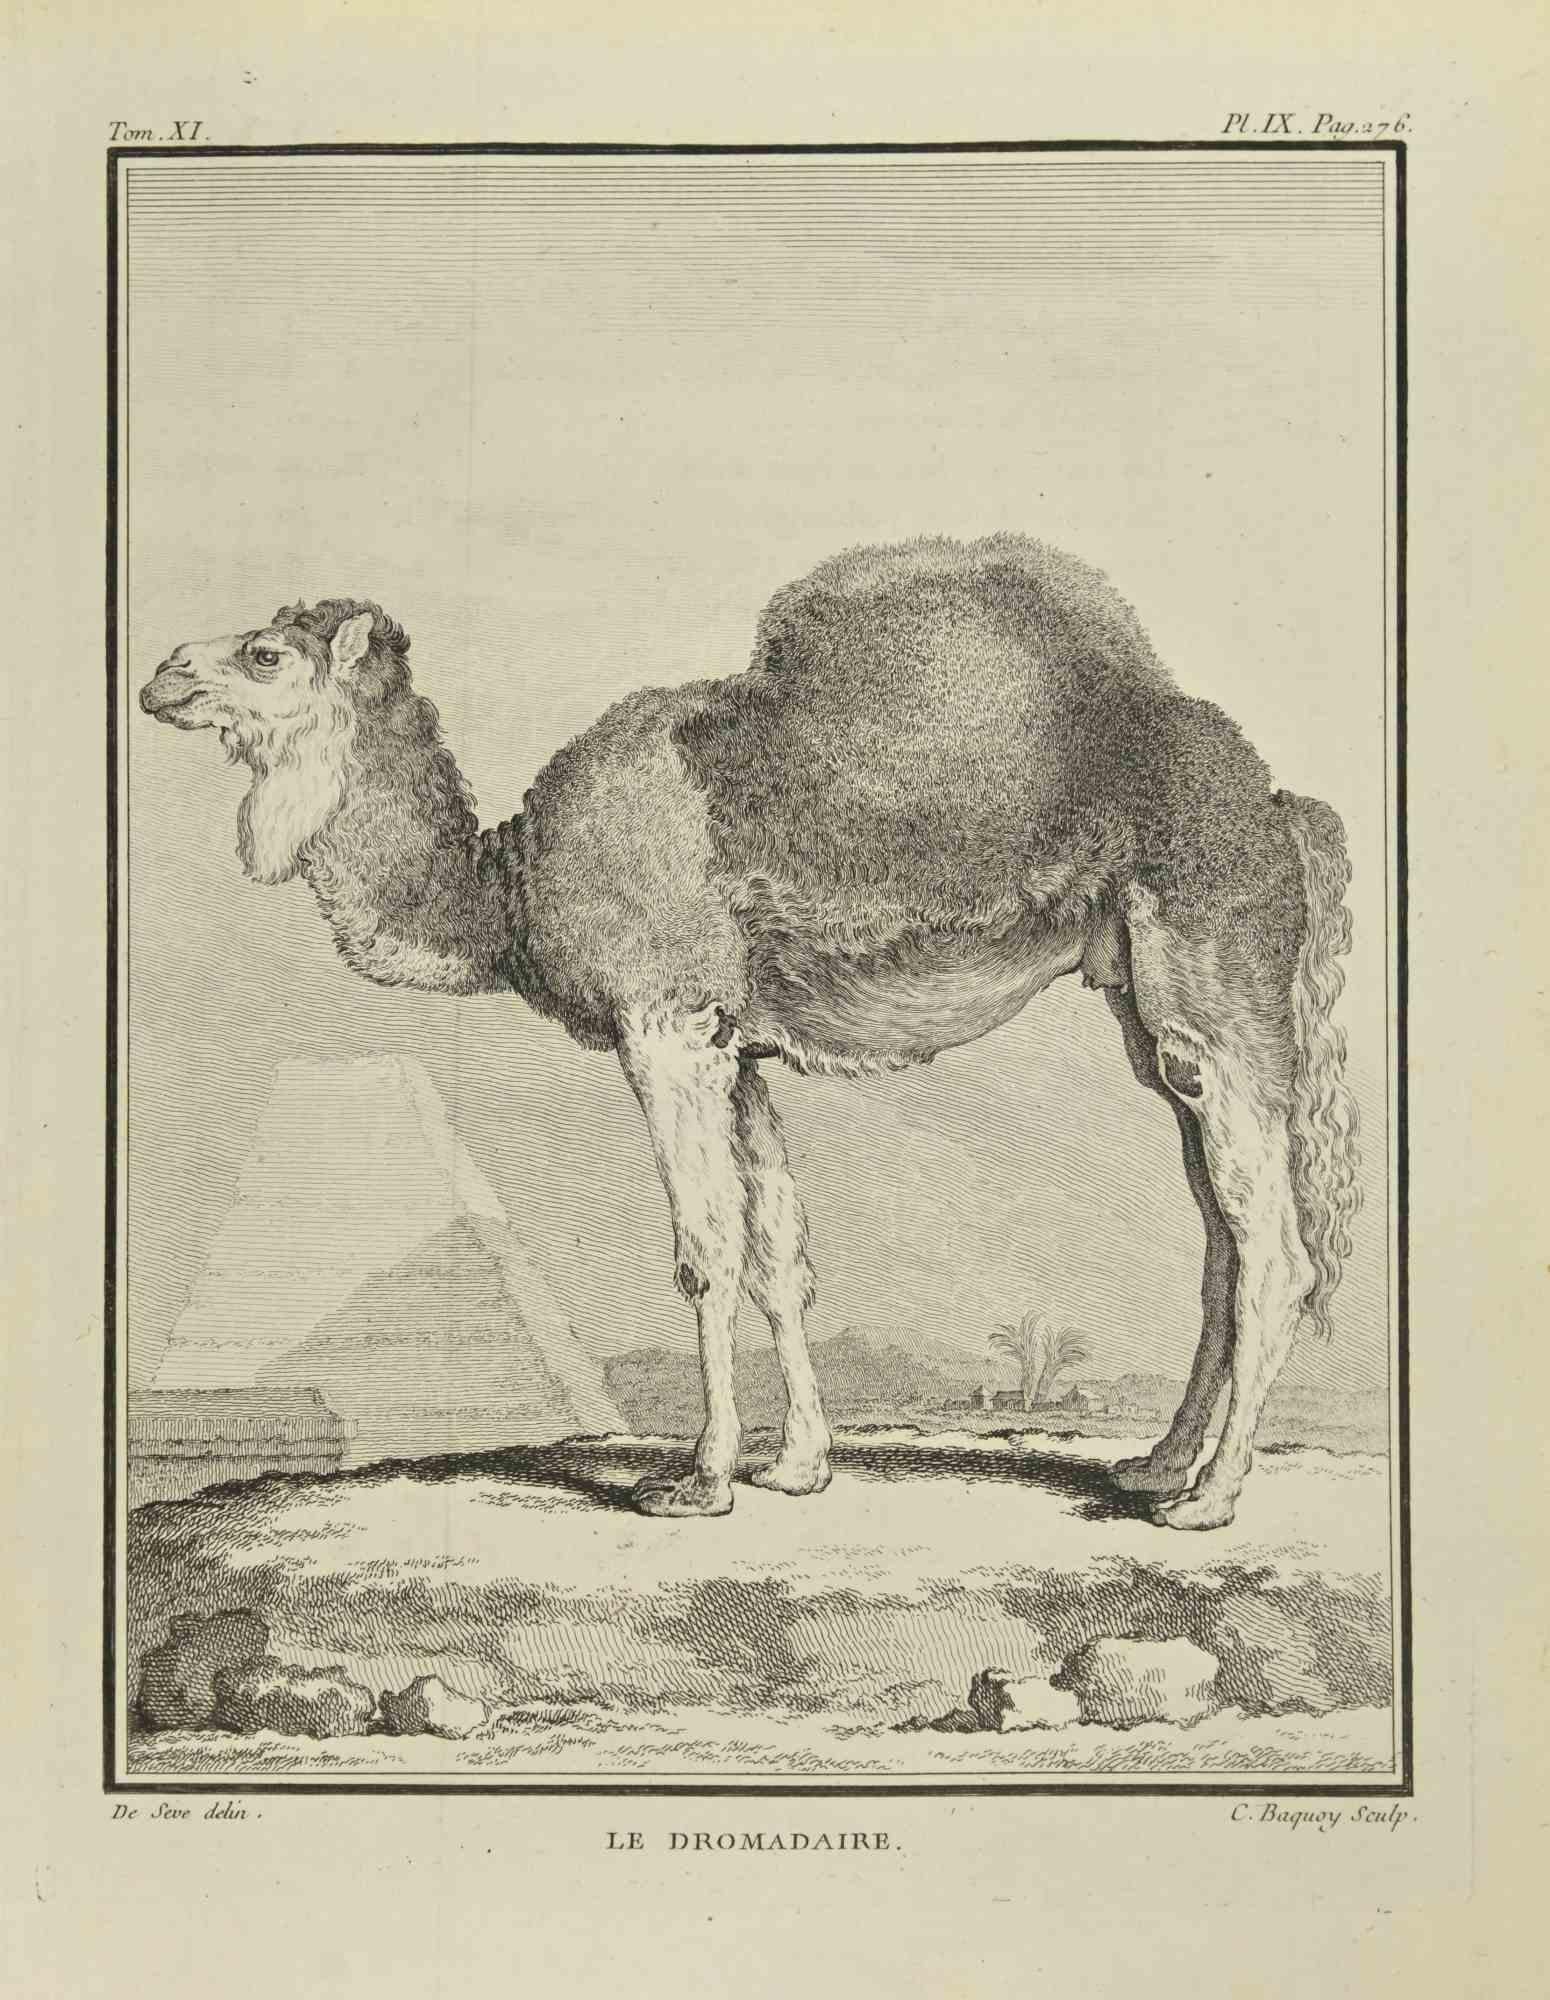 Le Dromadaire is an etching realized by Jean Charles Baquoy in 1771.

It belongs to the suite "Histoire Naturelle de Buffon".

The Artist's signature is engraved lower right.

Good conditions.